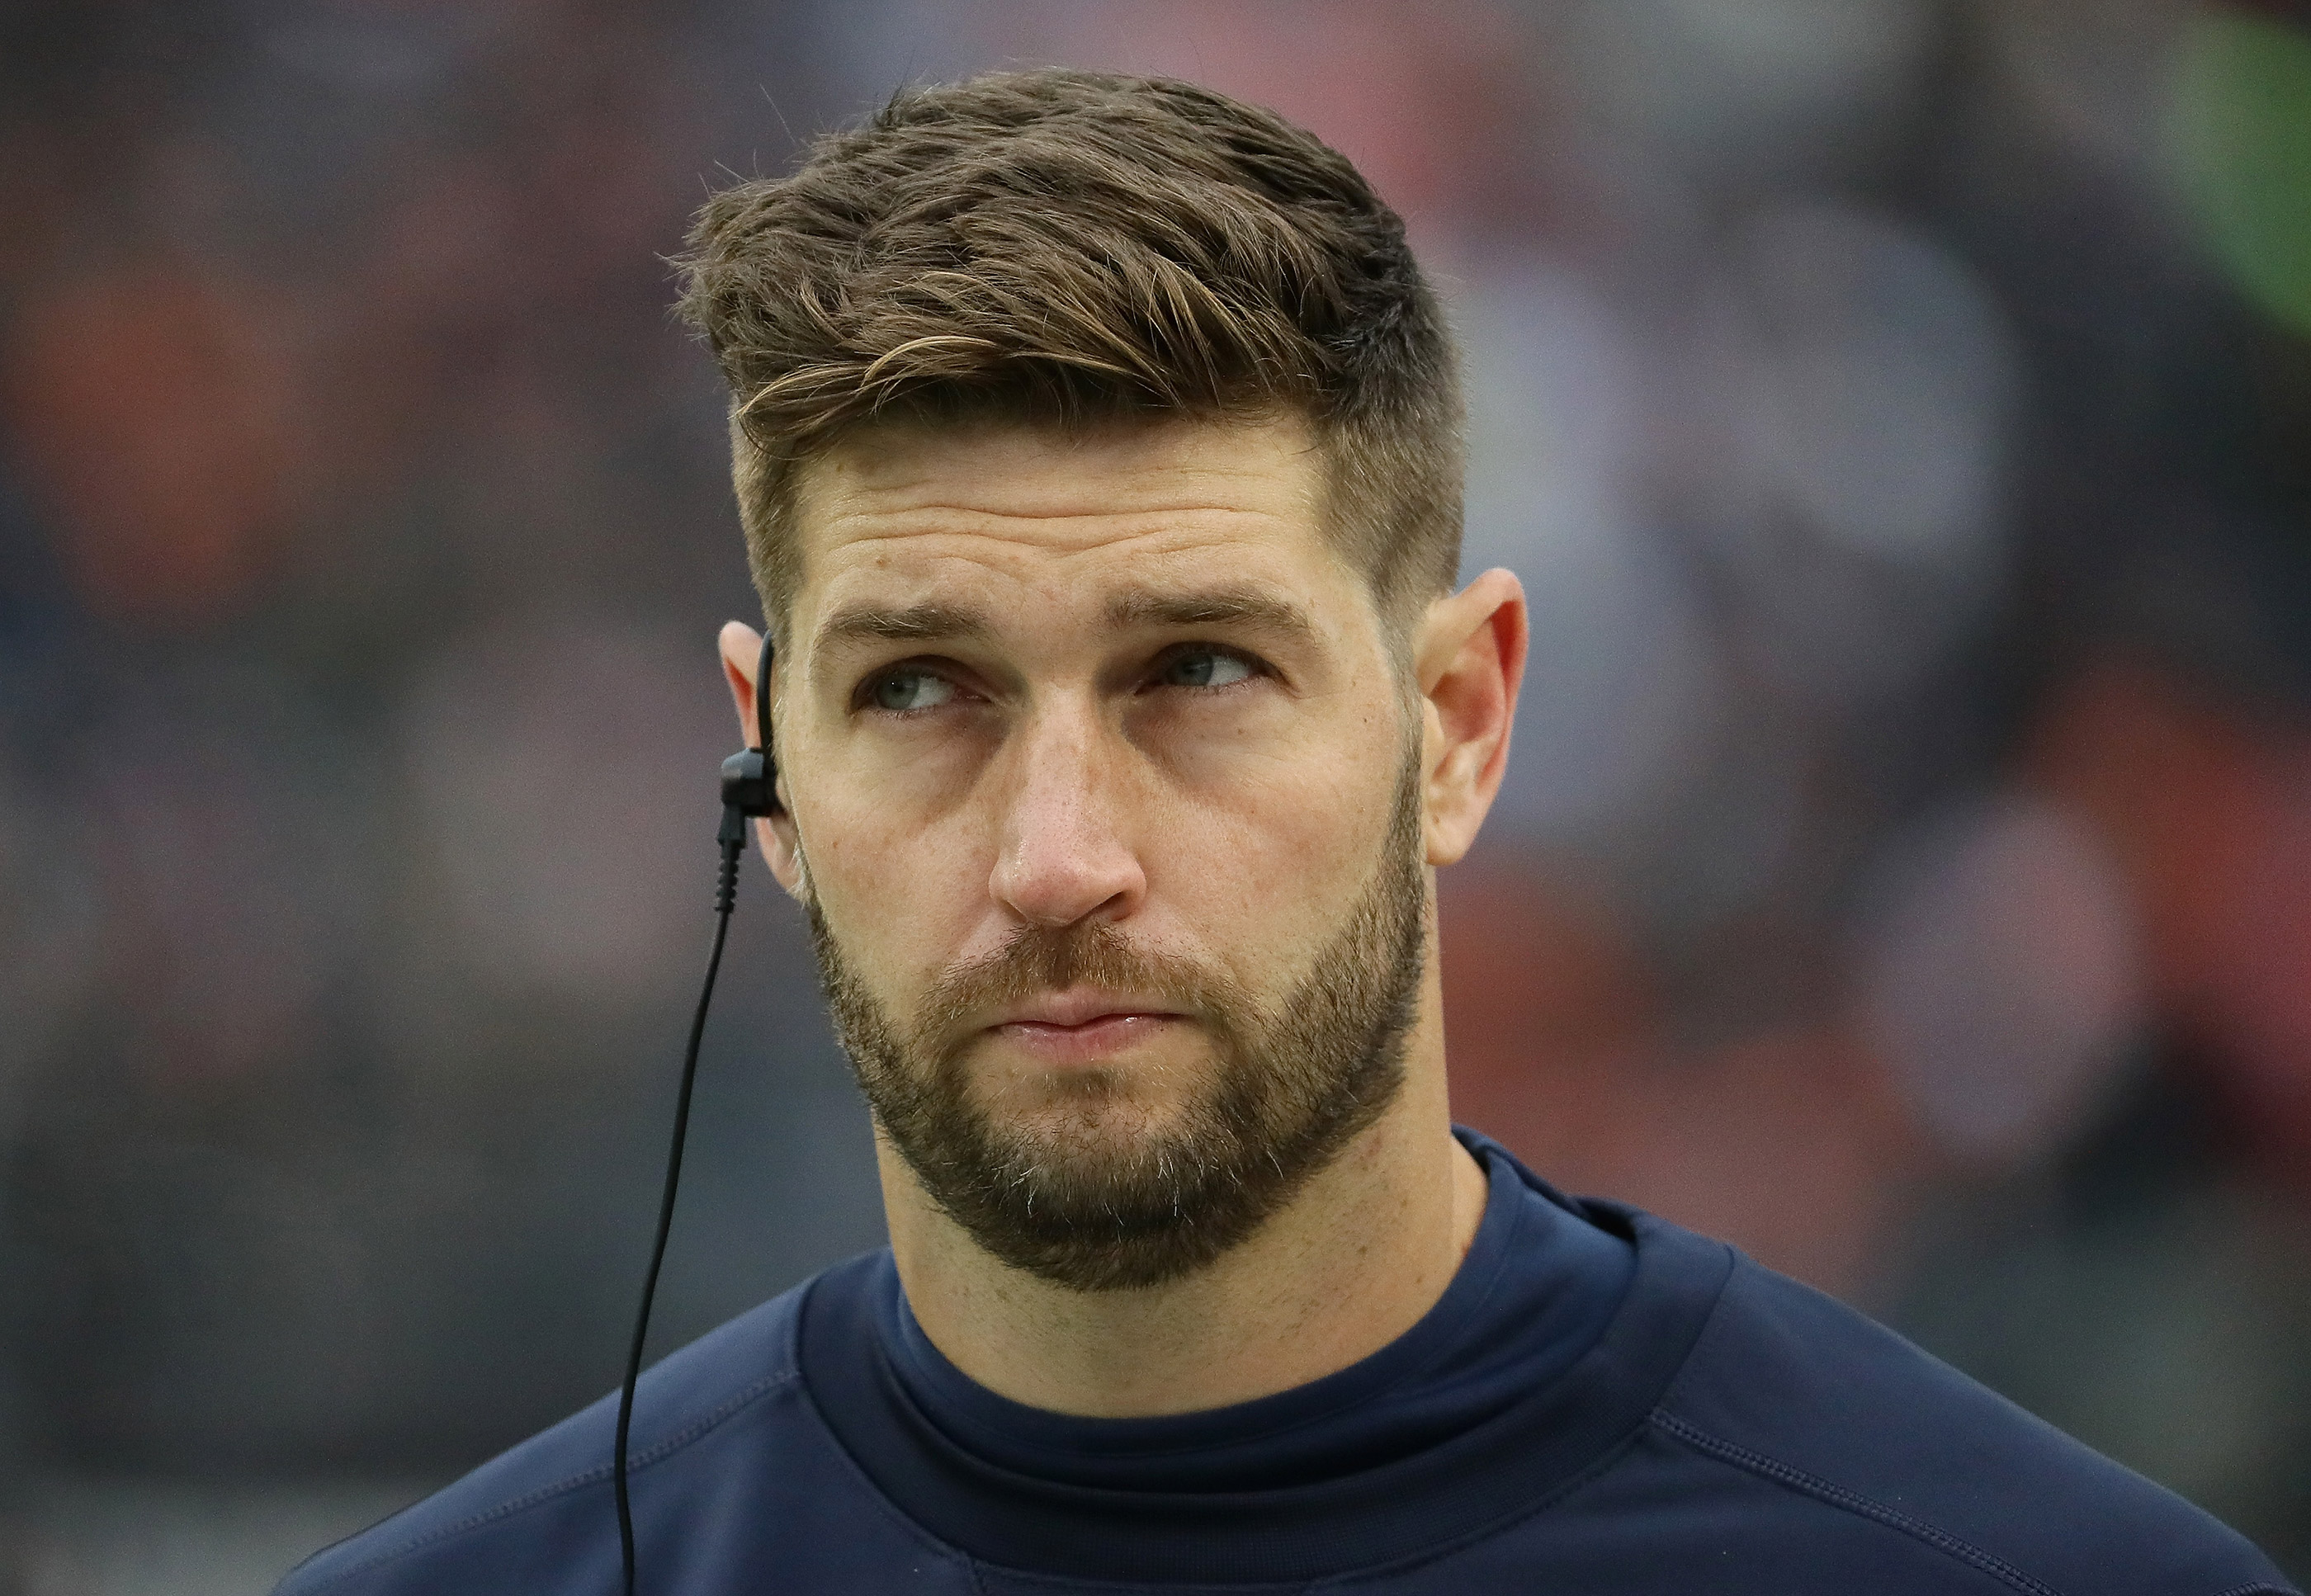 Jay Cutler, when he was with the Chicago Bears